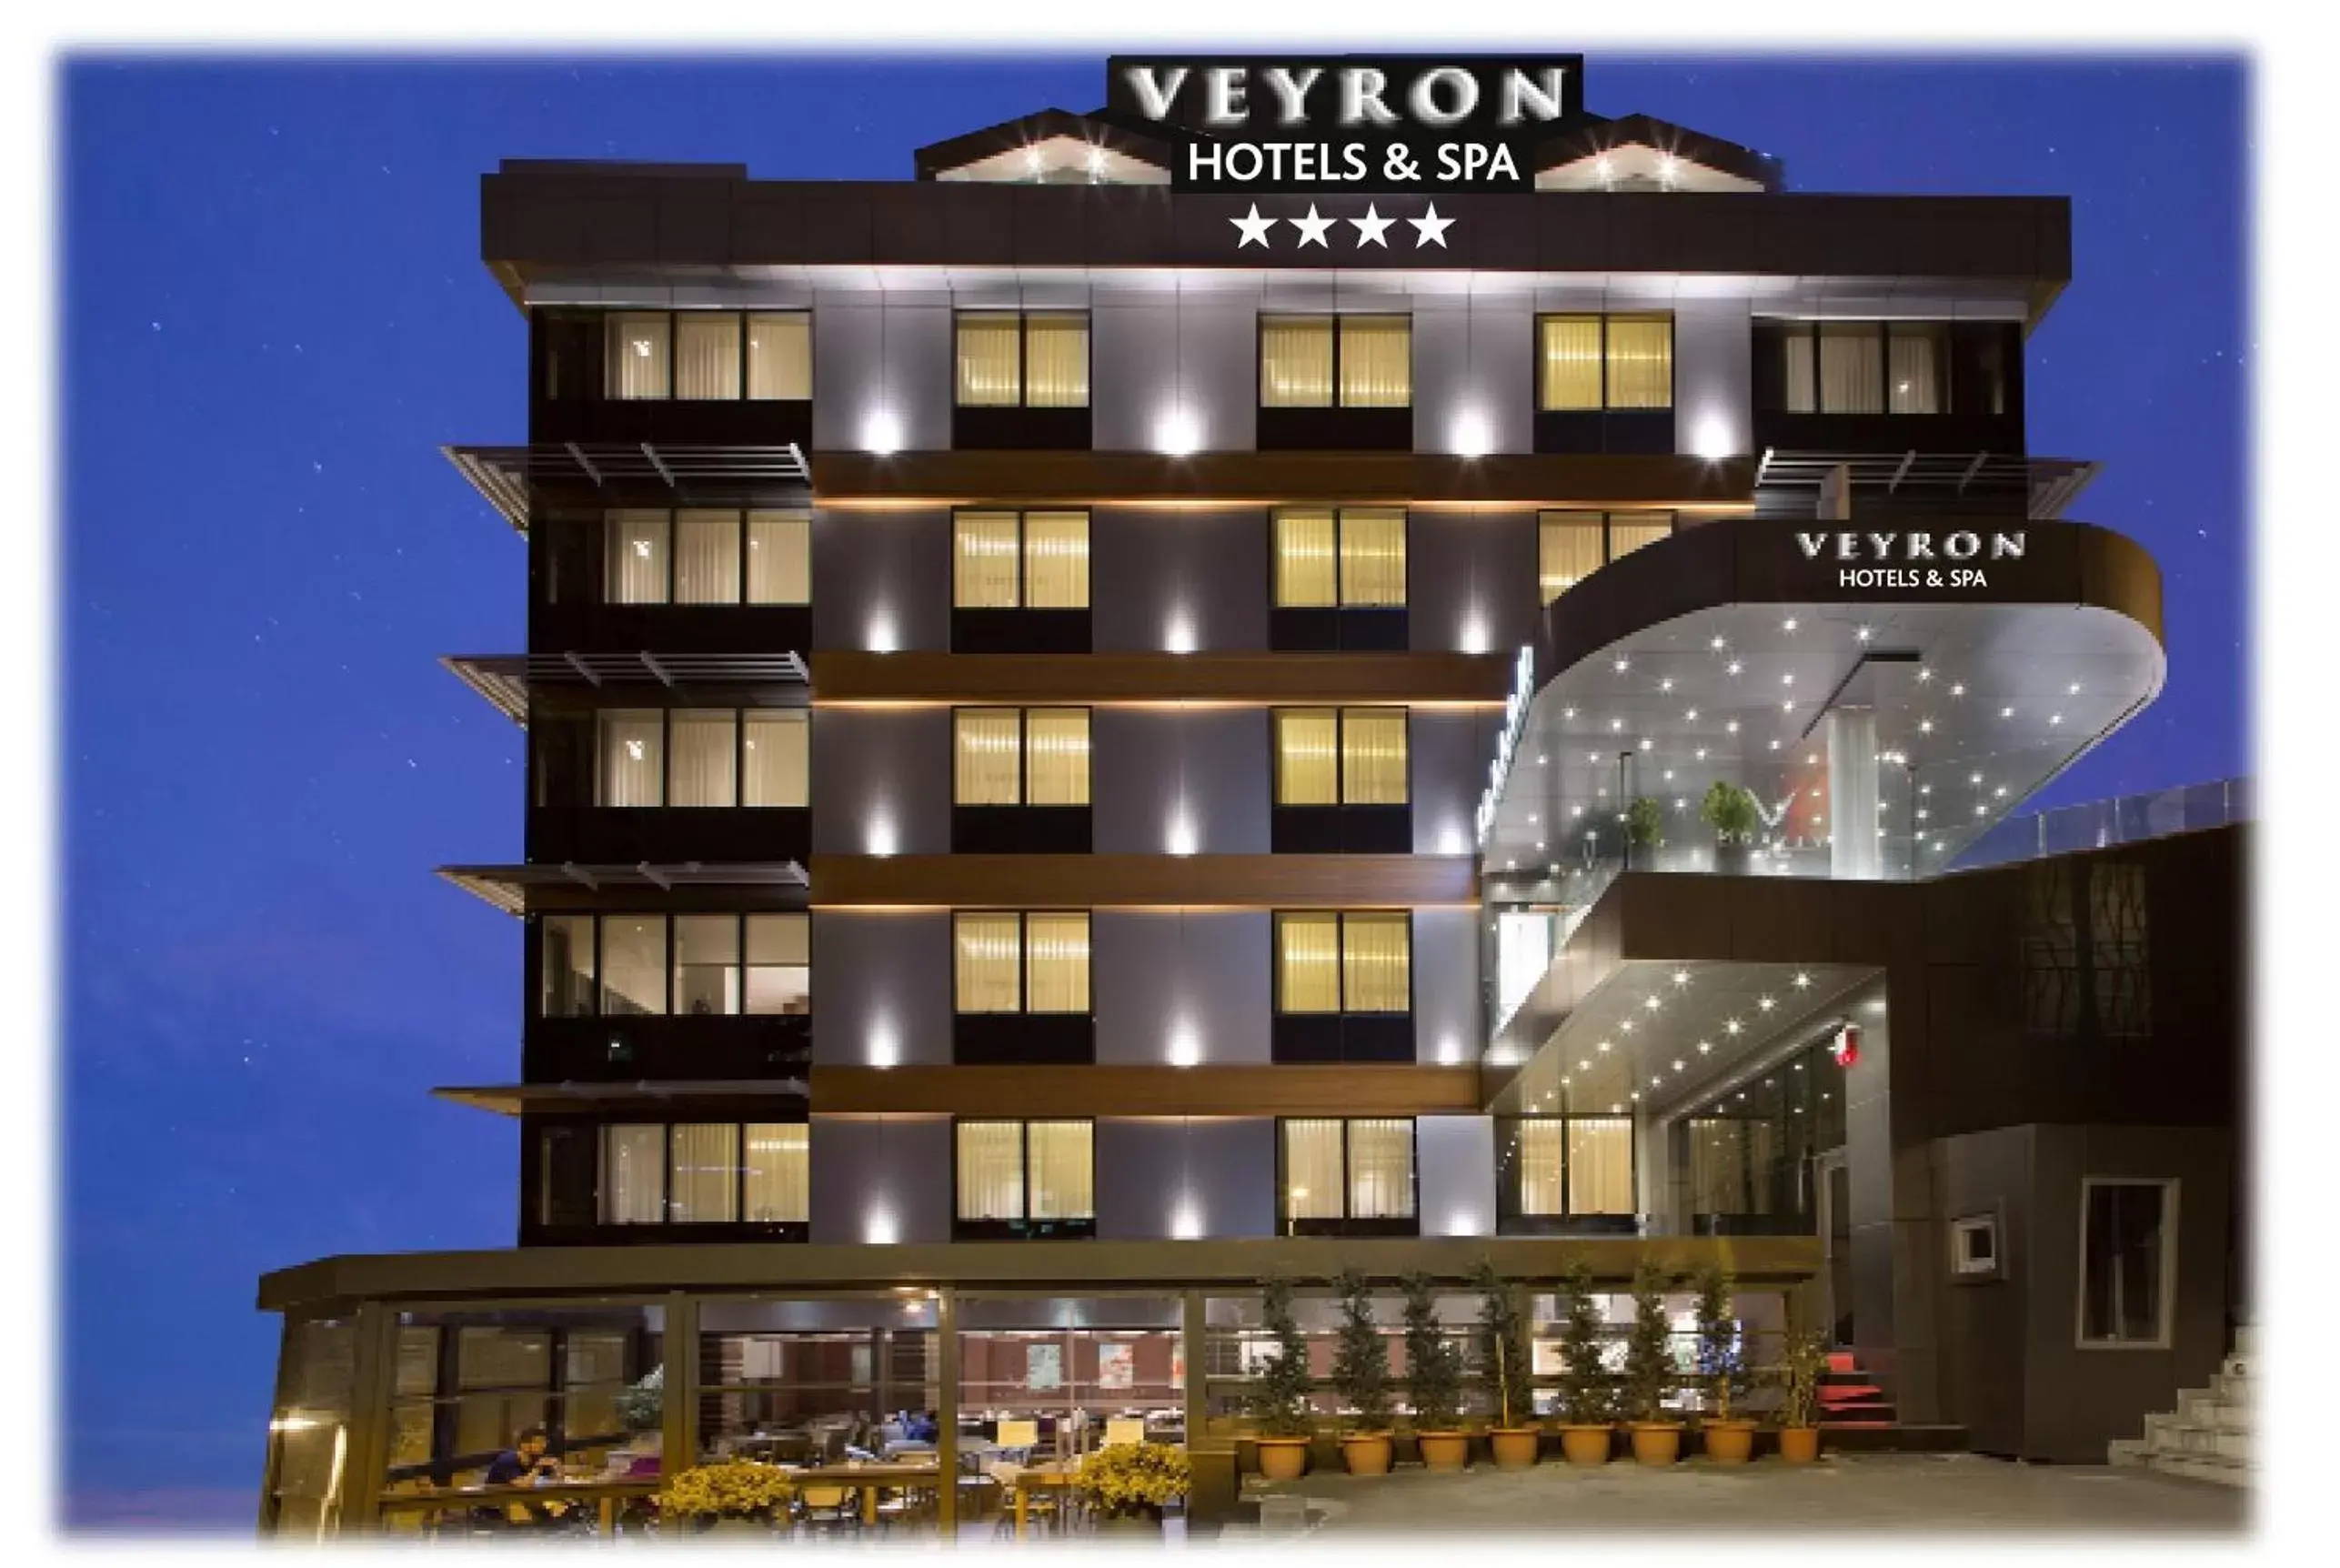 Property Building in Veyron Hotels & SPA